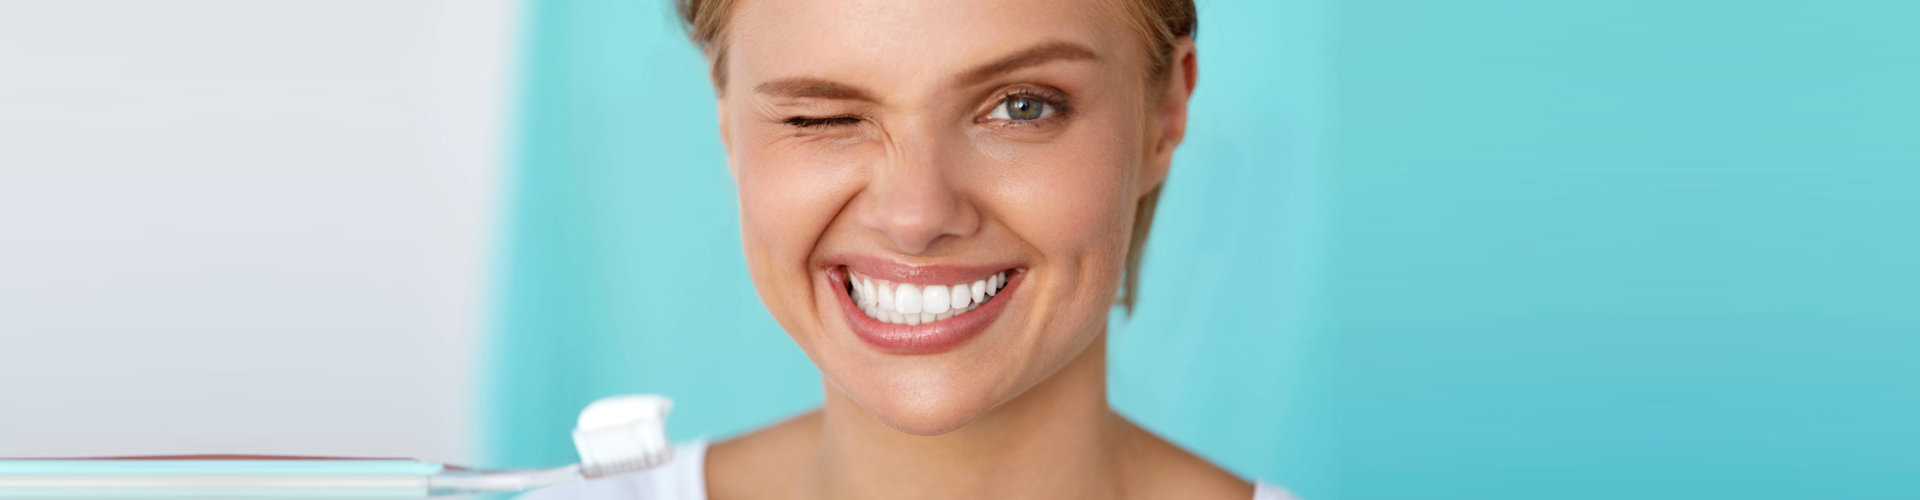 woman with a healthy white teeth